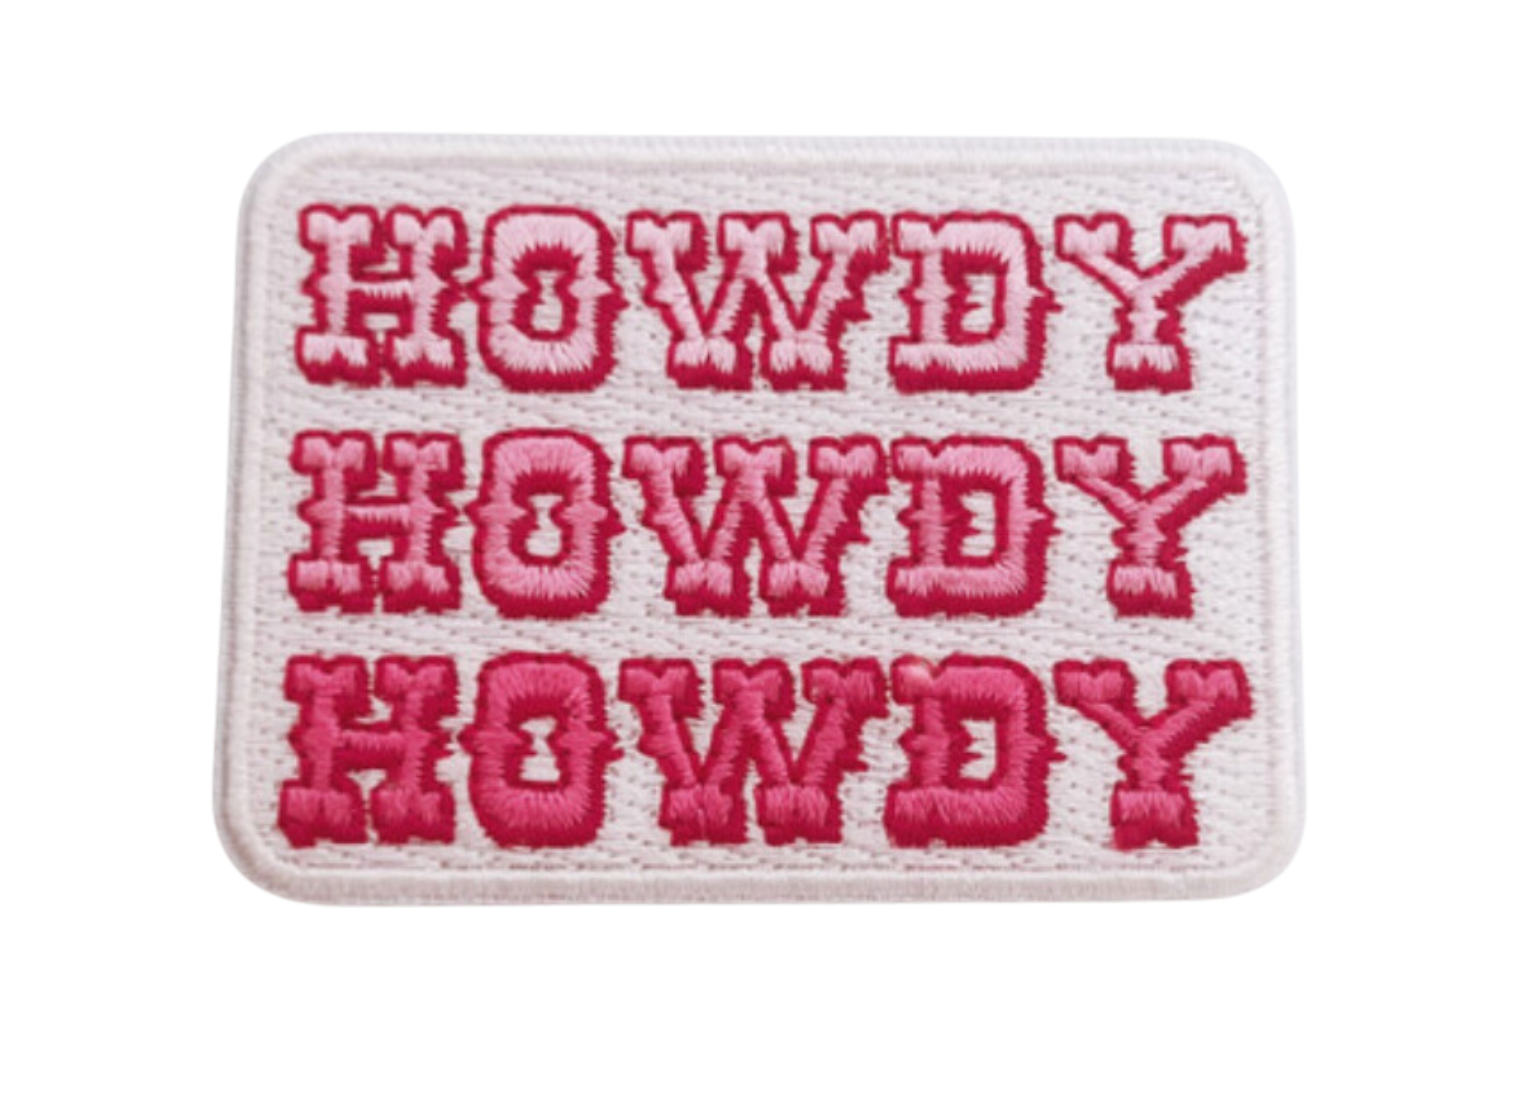 Iron On Patch - Howdy Howdy Howdy